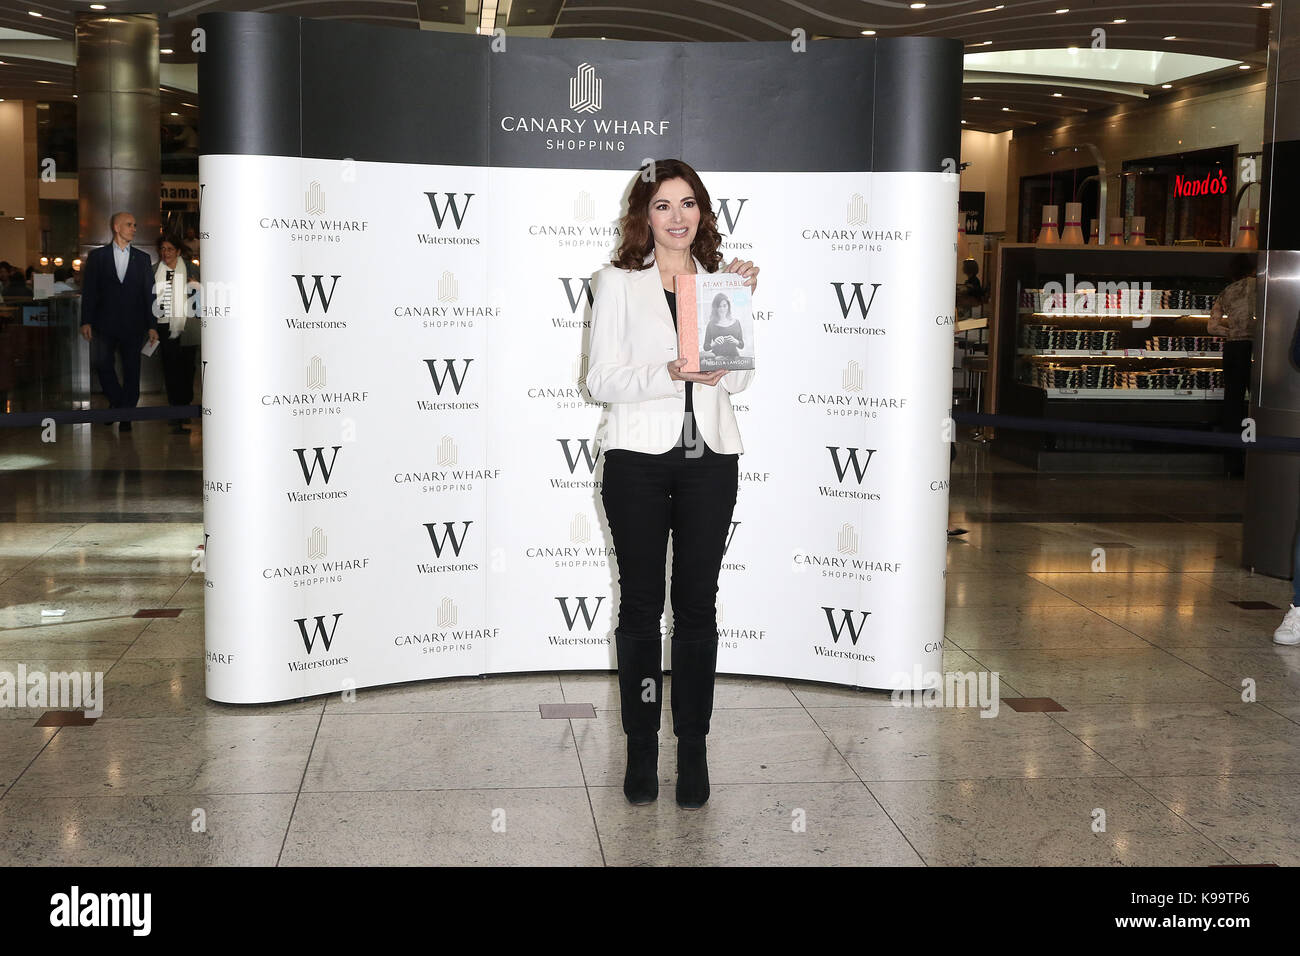 London, UK. 22nd Sep, 2017. Nigella Lawson, signing copies of At My Table, Waterstones Canary Wharf, London, UK. 22nd Sep, 2017. Photo by Richard Goldschmidt Credit: Rich Gold/Alamy Live News Stock Photo